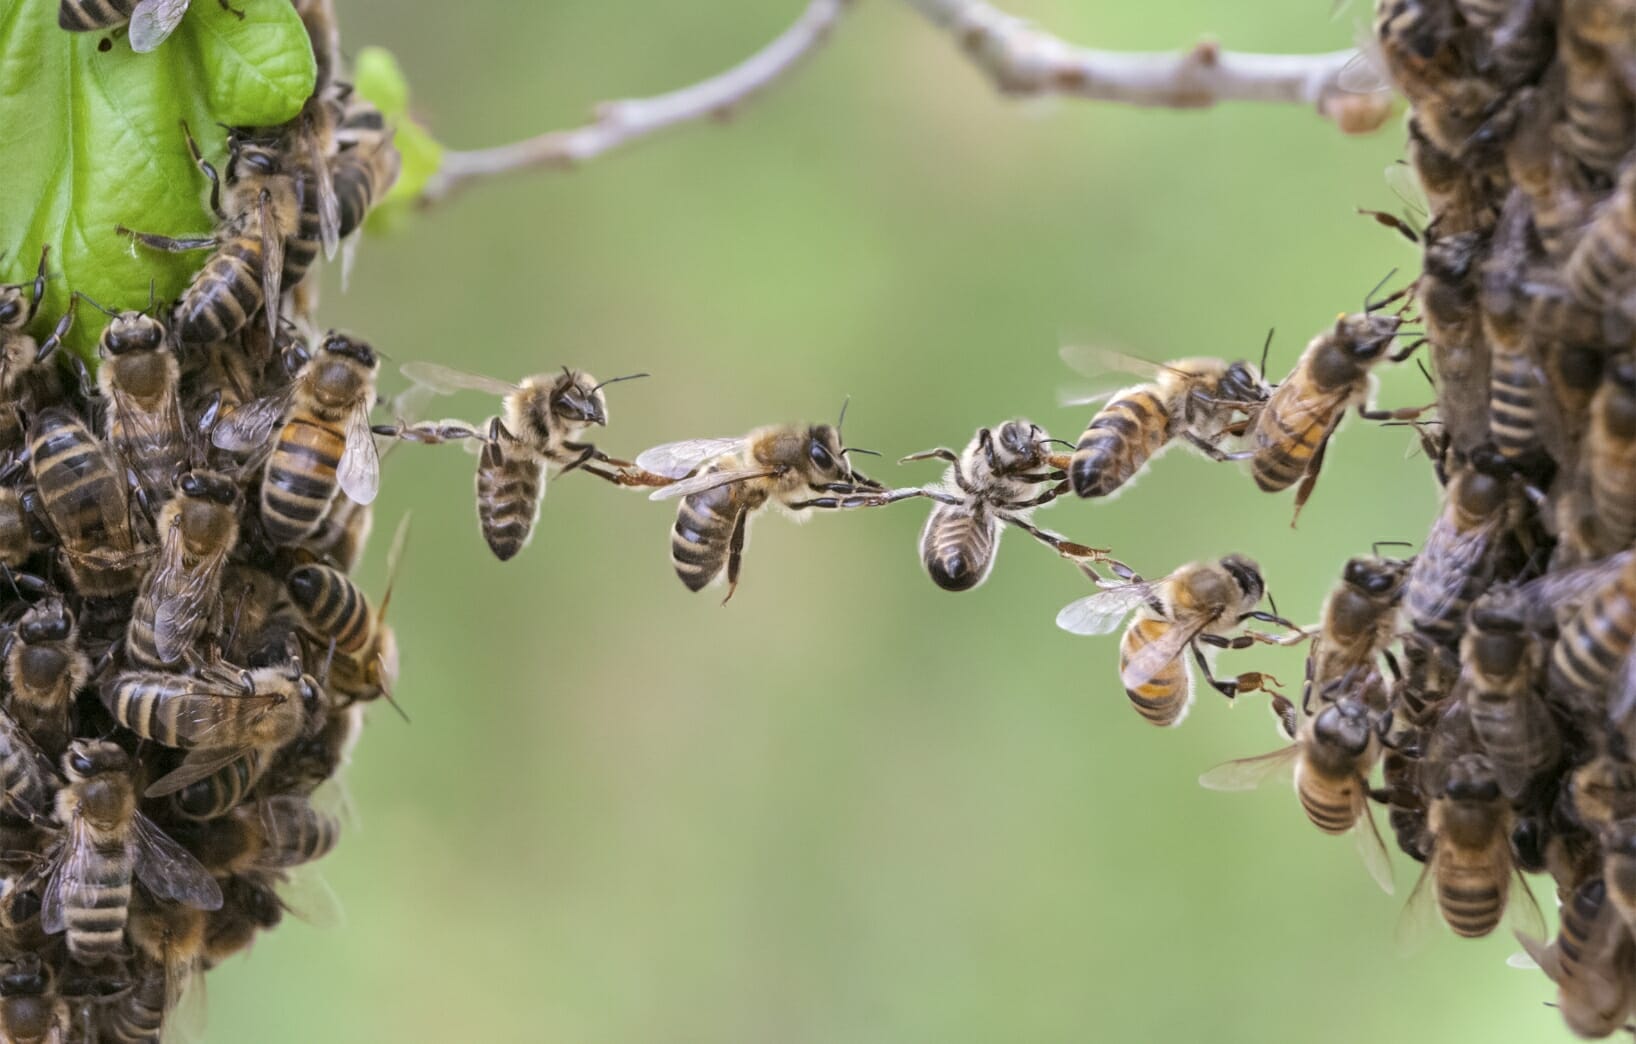 Swarm of bees on two branches with several bees creating a bredige between the two groups